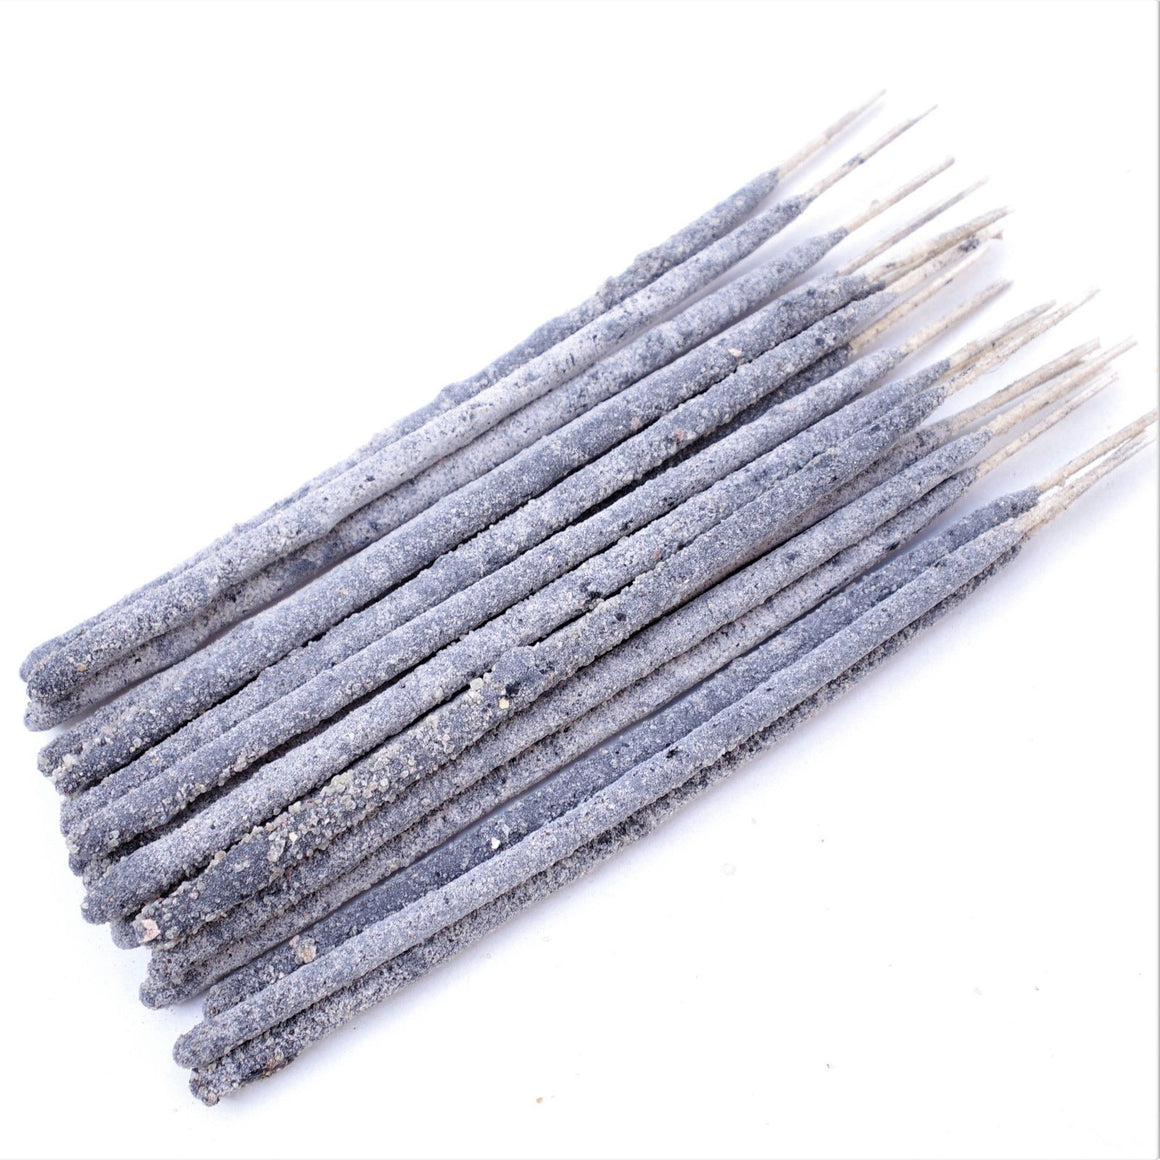 New Shorties 40 Sticks Deluxe Mayan White Copal Resin Incense Chiapas Mexico